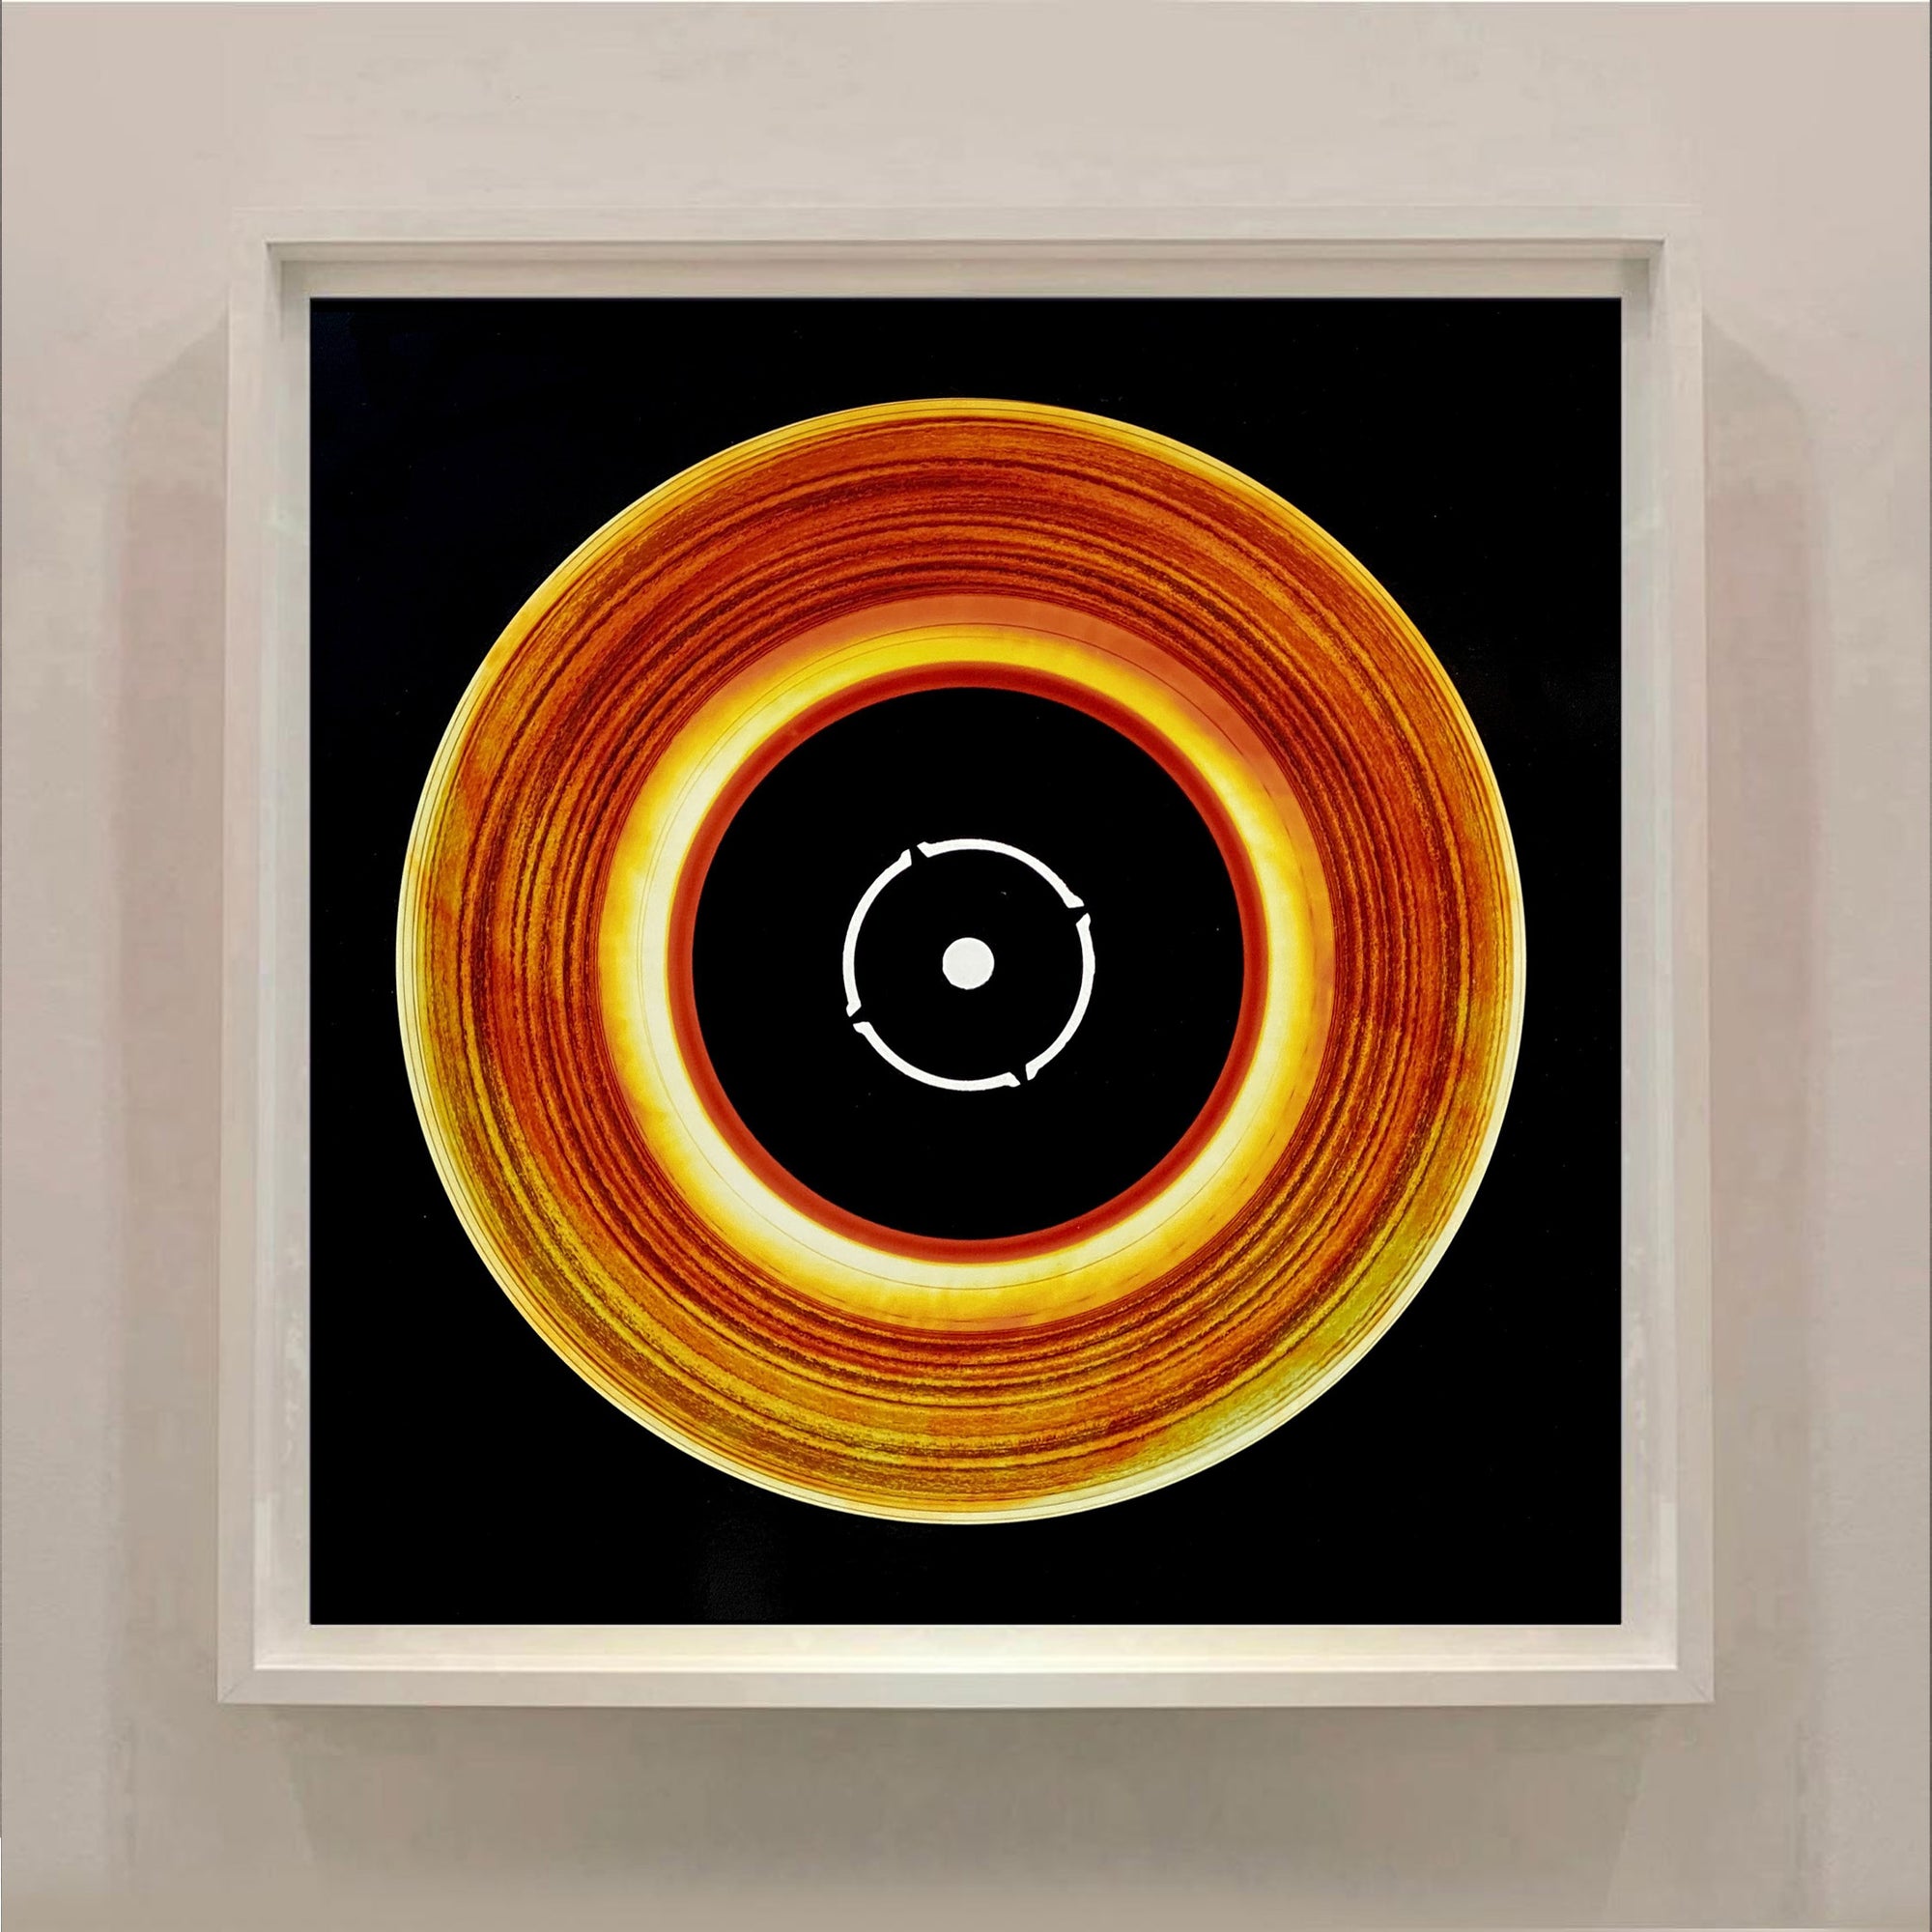 Vinyl Collection 'Black Label' (Fire), 2016. Acclaimed contemporary photographers, Richard Heeps and Natasha Heidler have collaborated to make this beautifully mesmerising collection. A celebration of the vinyl record and analogue technology, which reflects the artists practice within photography.